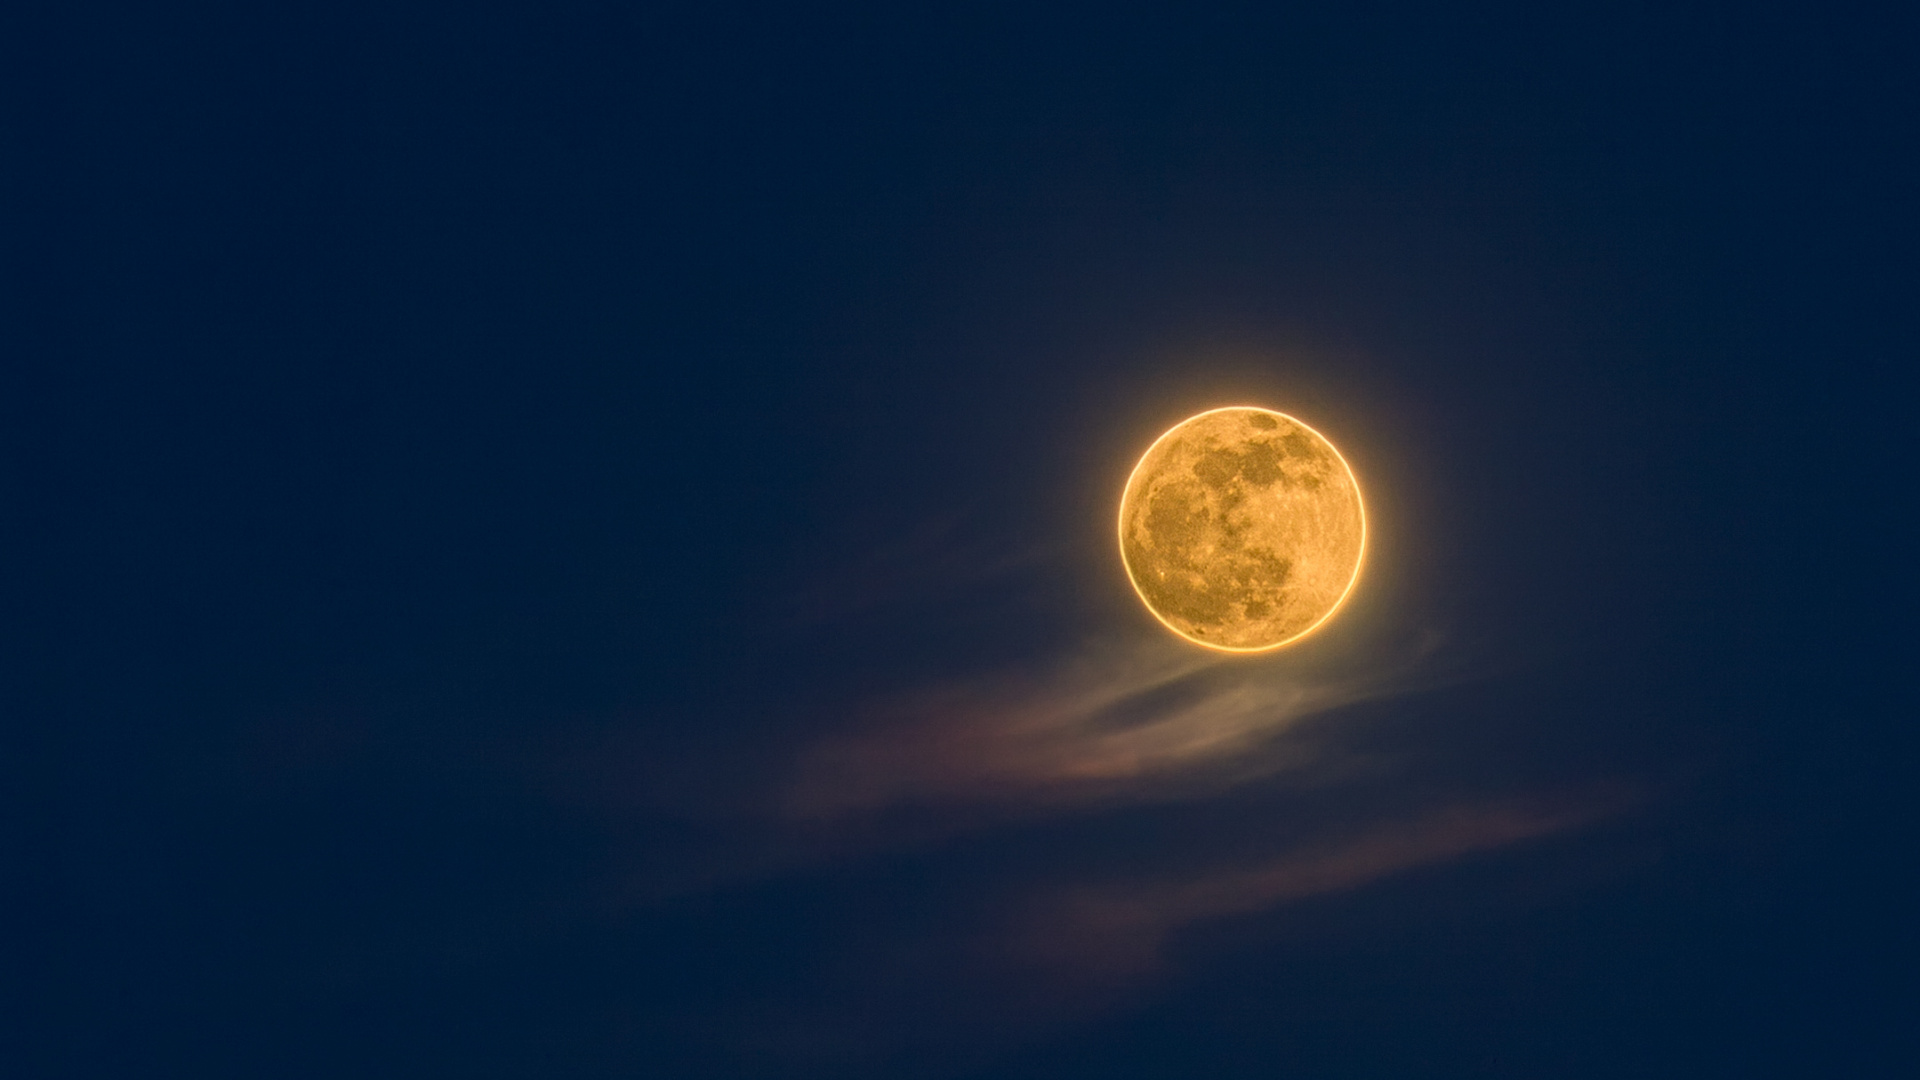 Full Moon in The Sky. Wallpaper in 1920x1080 Resolution